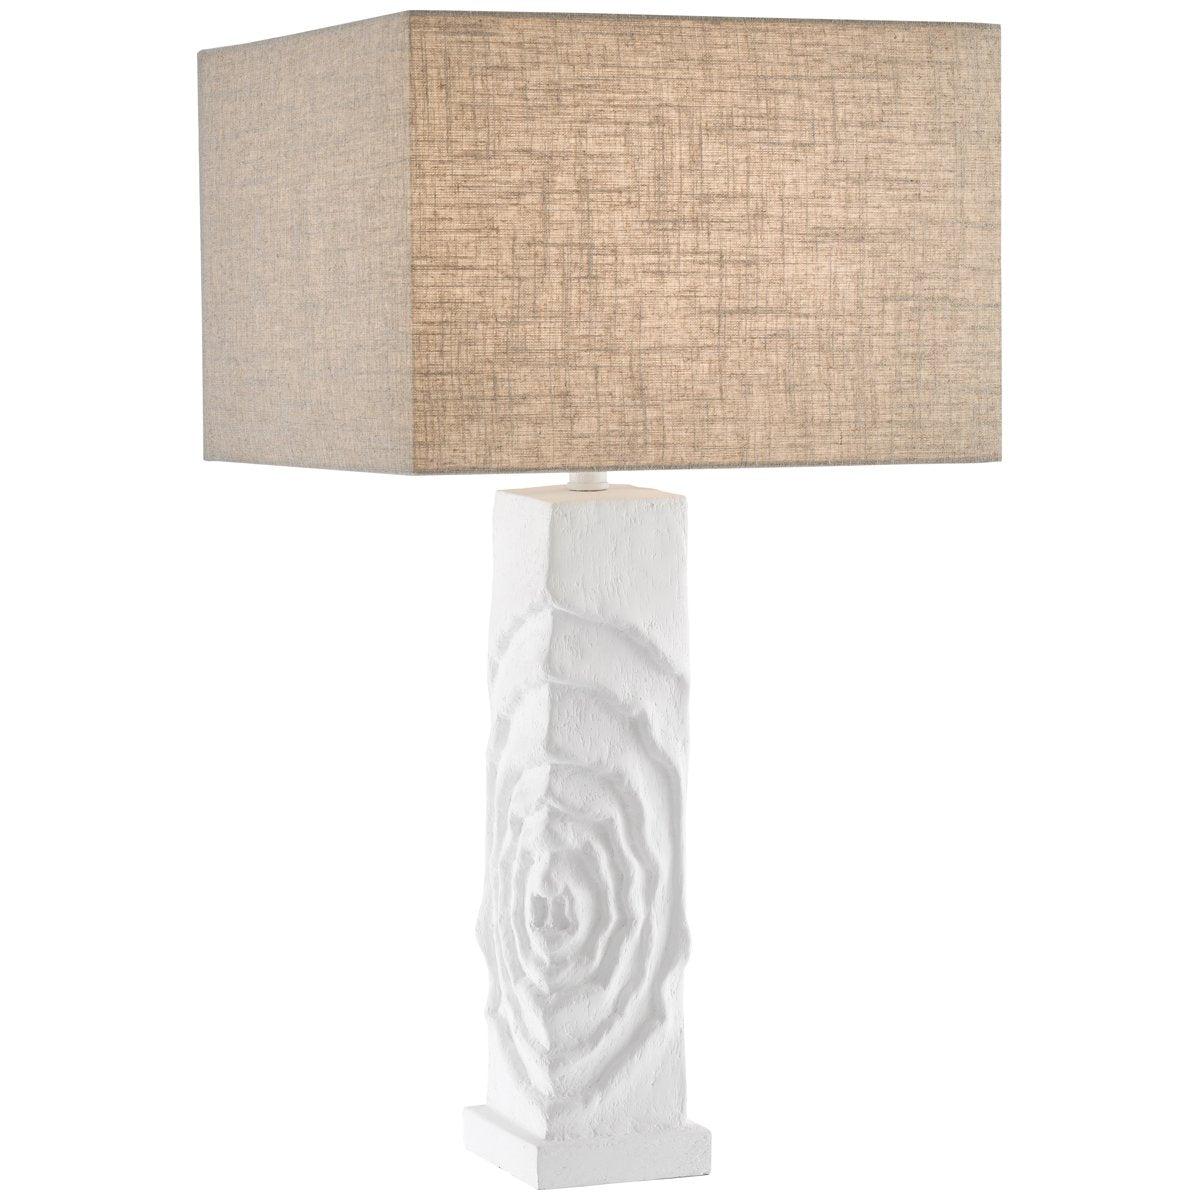 Currey and Company Littlecotes Table Lamp